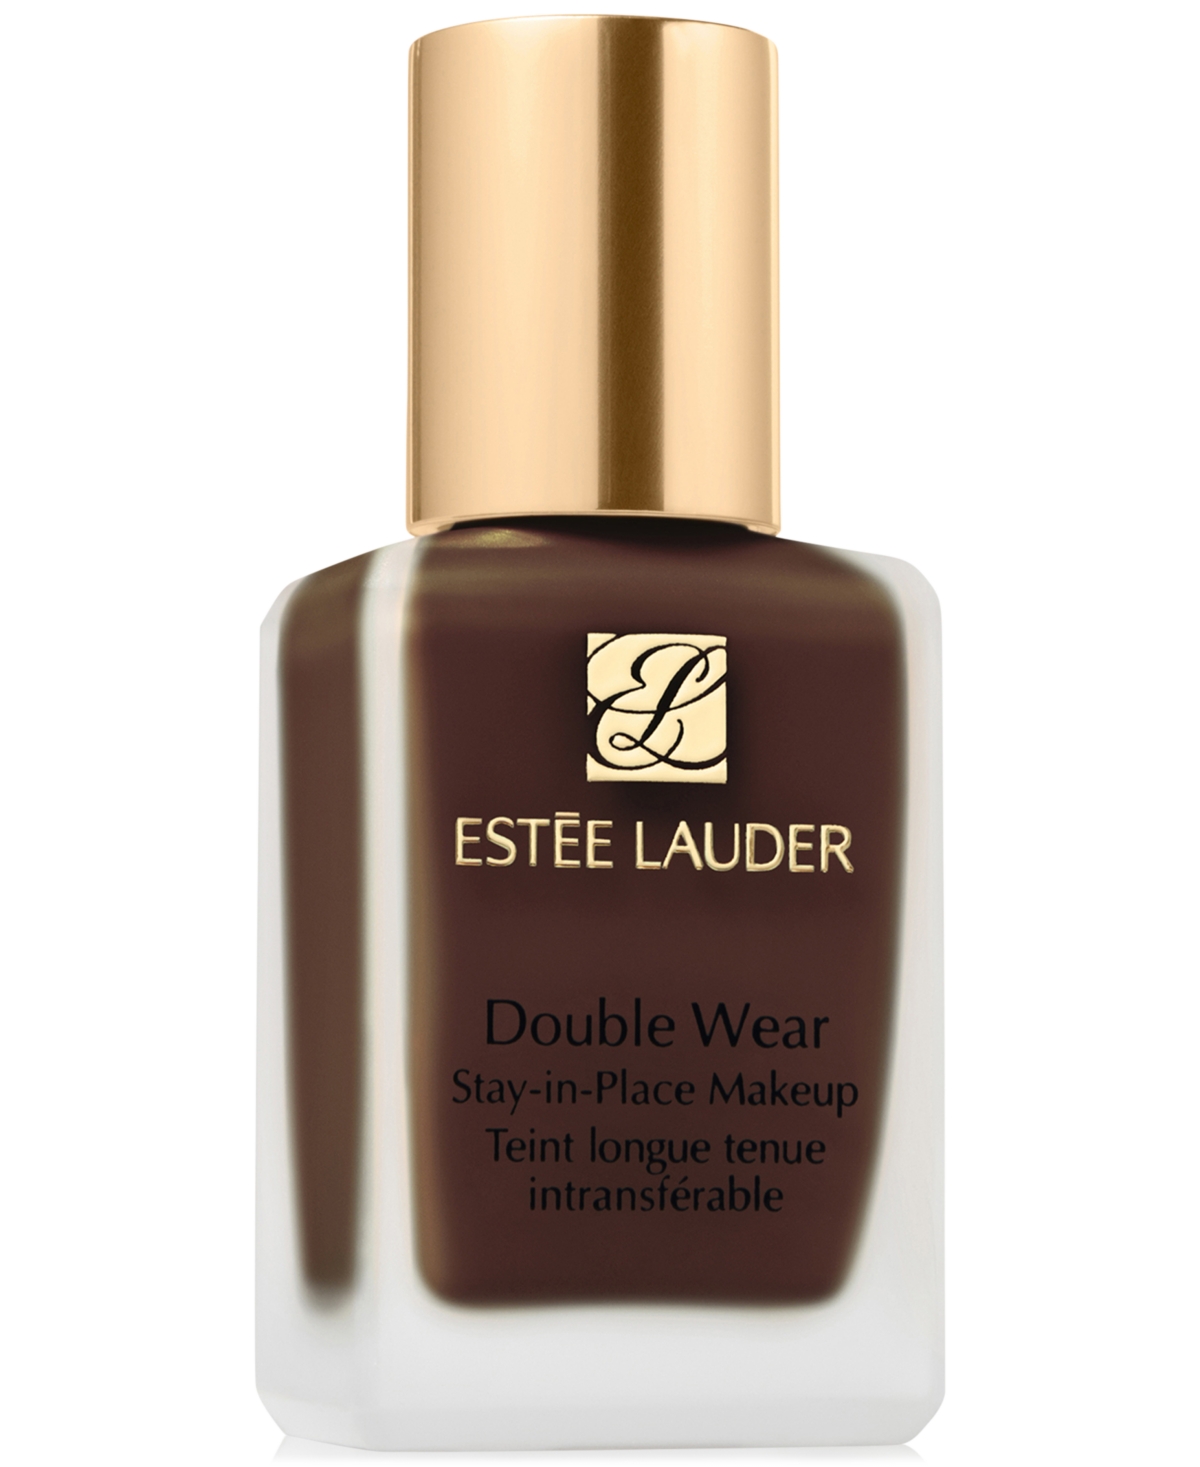 Estée Lauder Double Wear Stay-in-place Makeup, 1 Oz. In N Ebony,the Most Deep With Rich Neutral